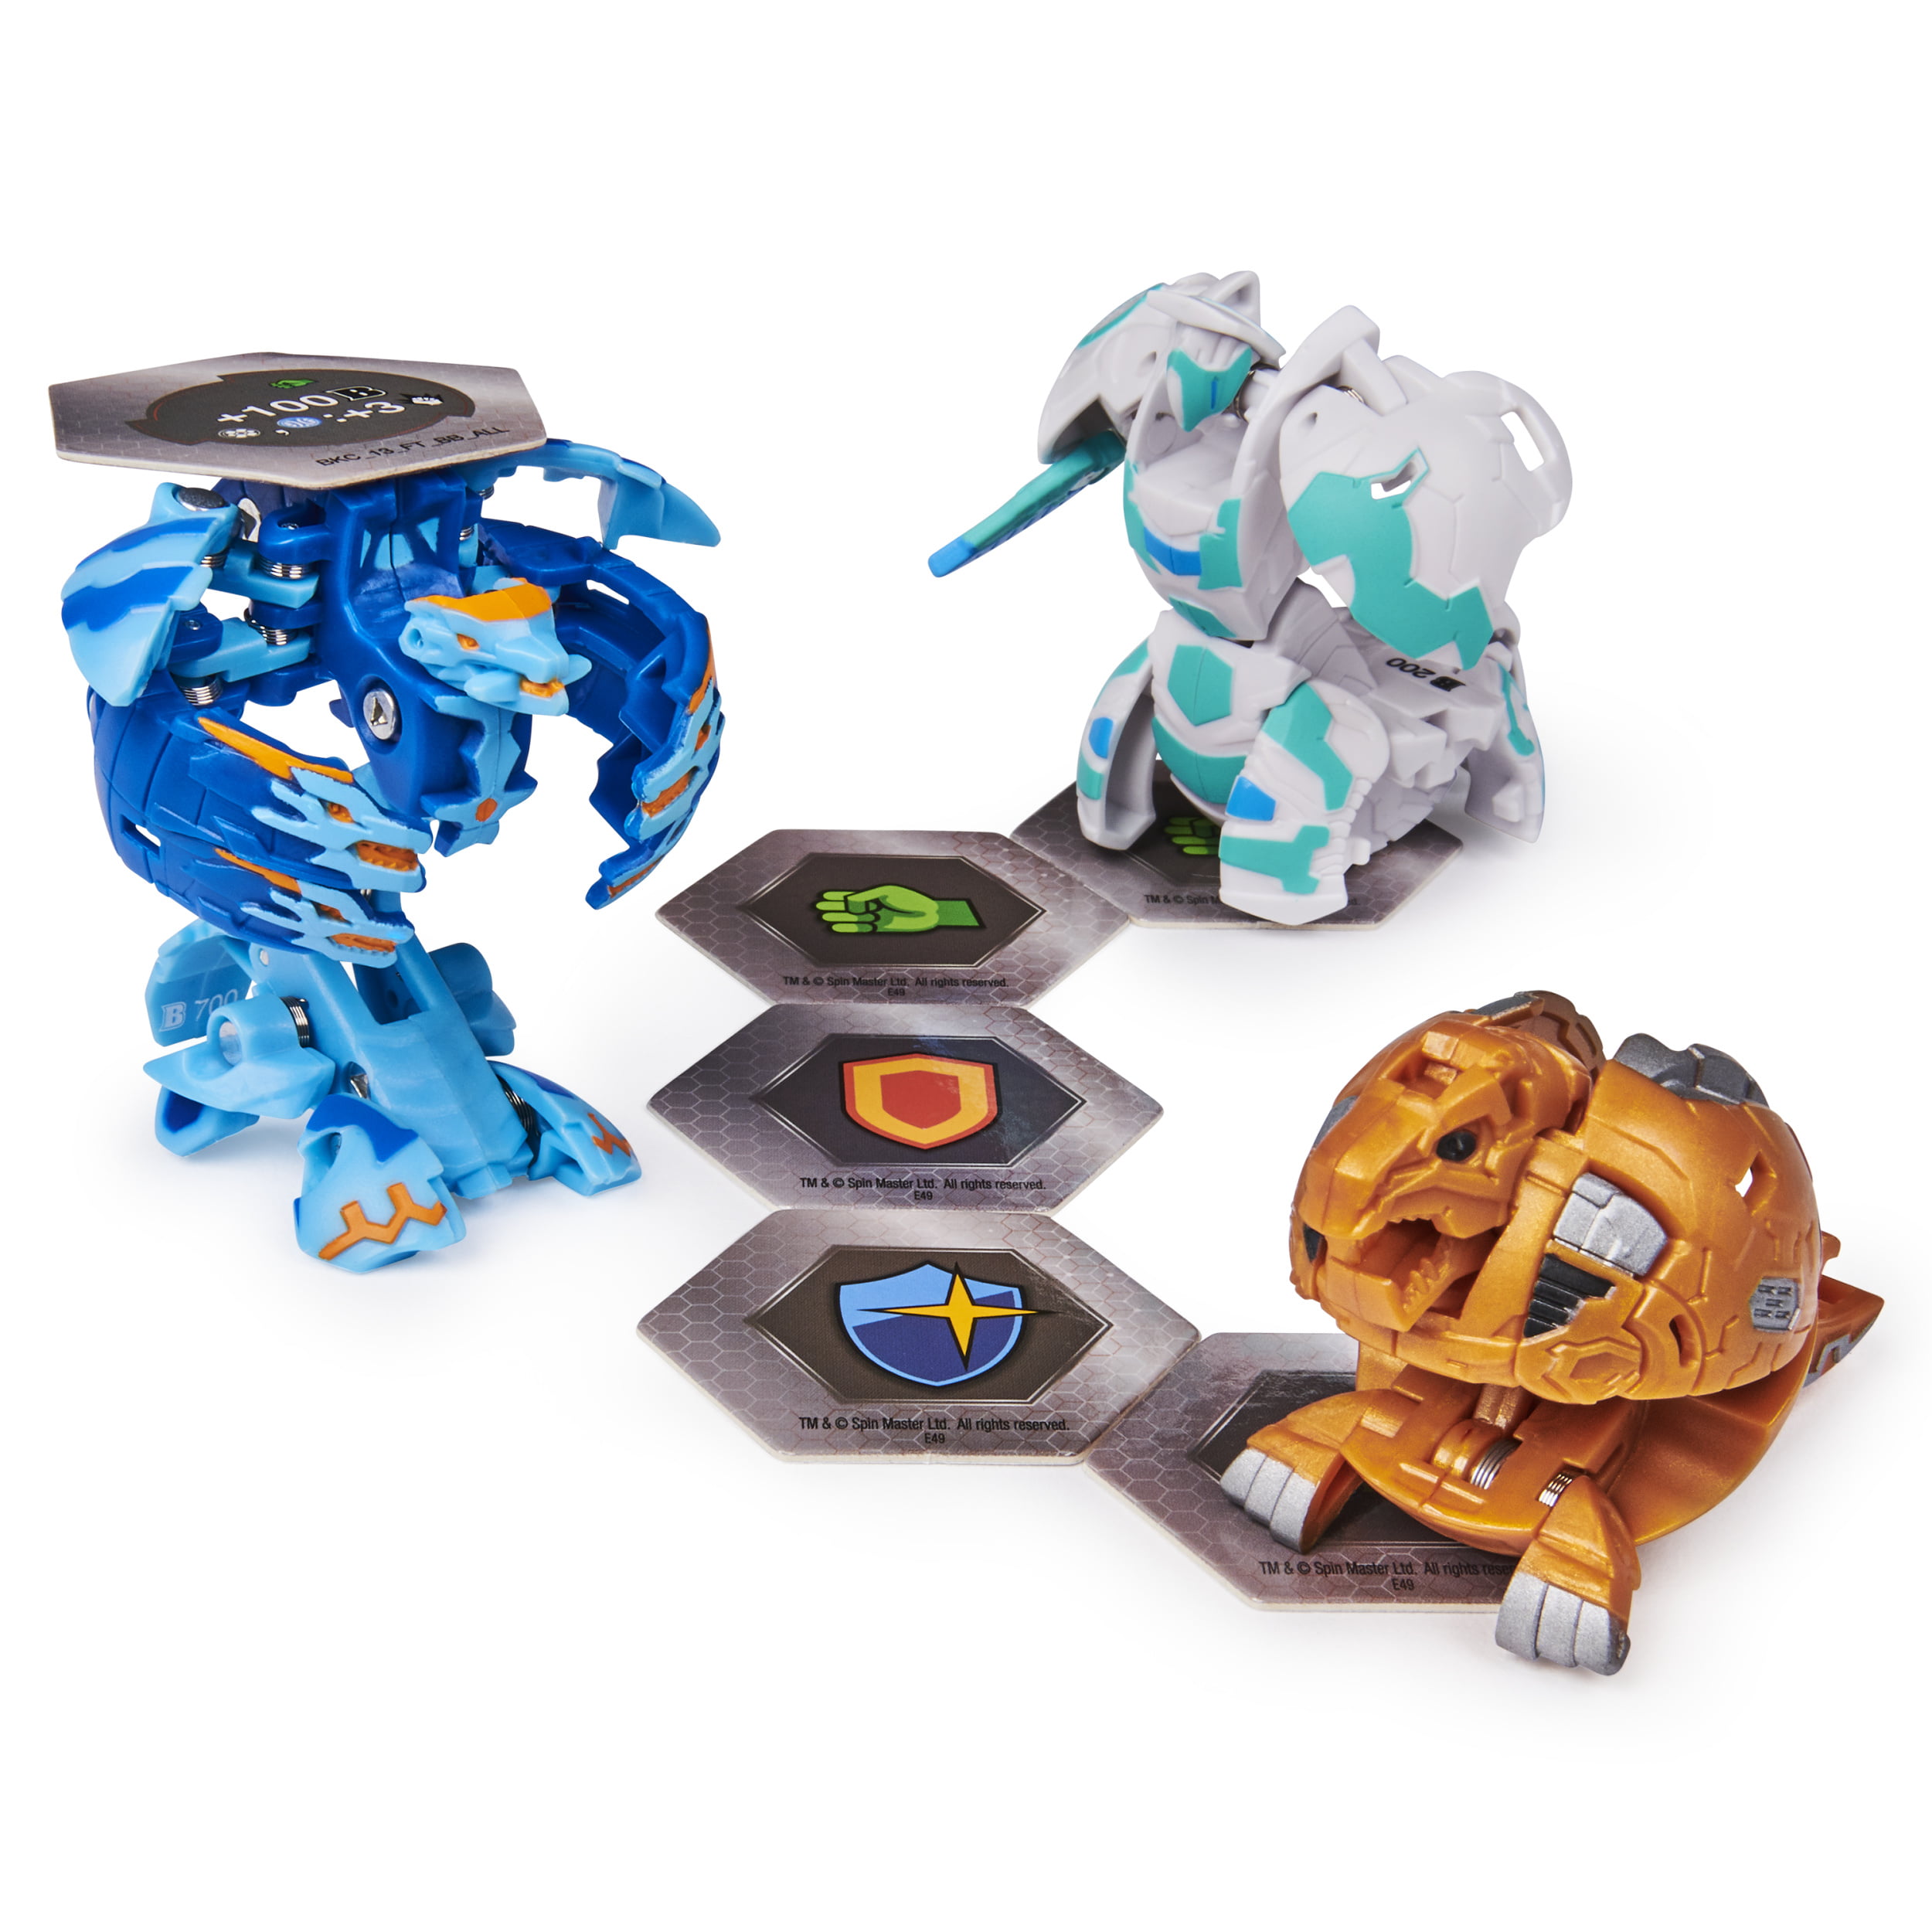 Bakugan Battle Planet Hydranoid Starter Pack, Action Figure and